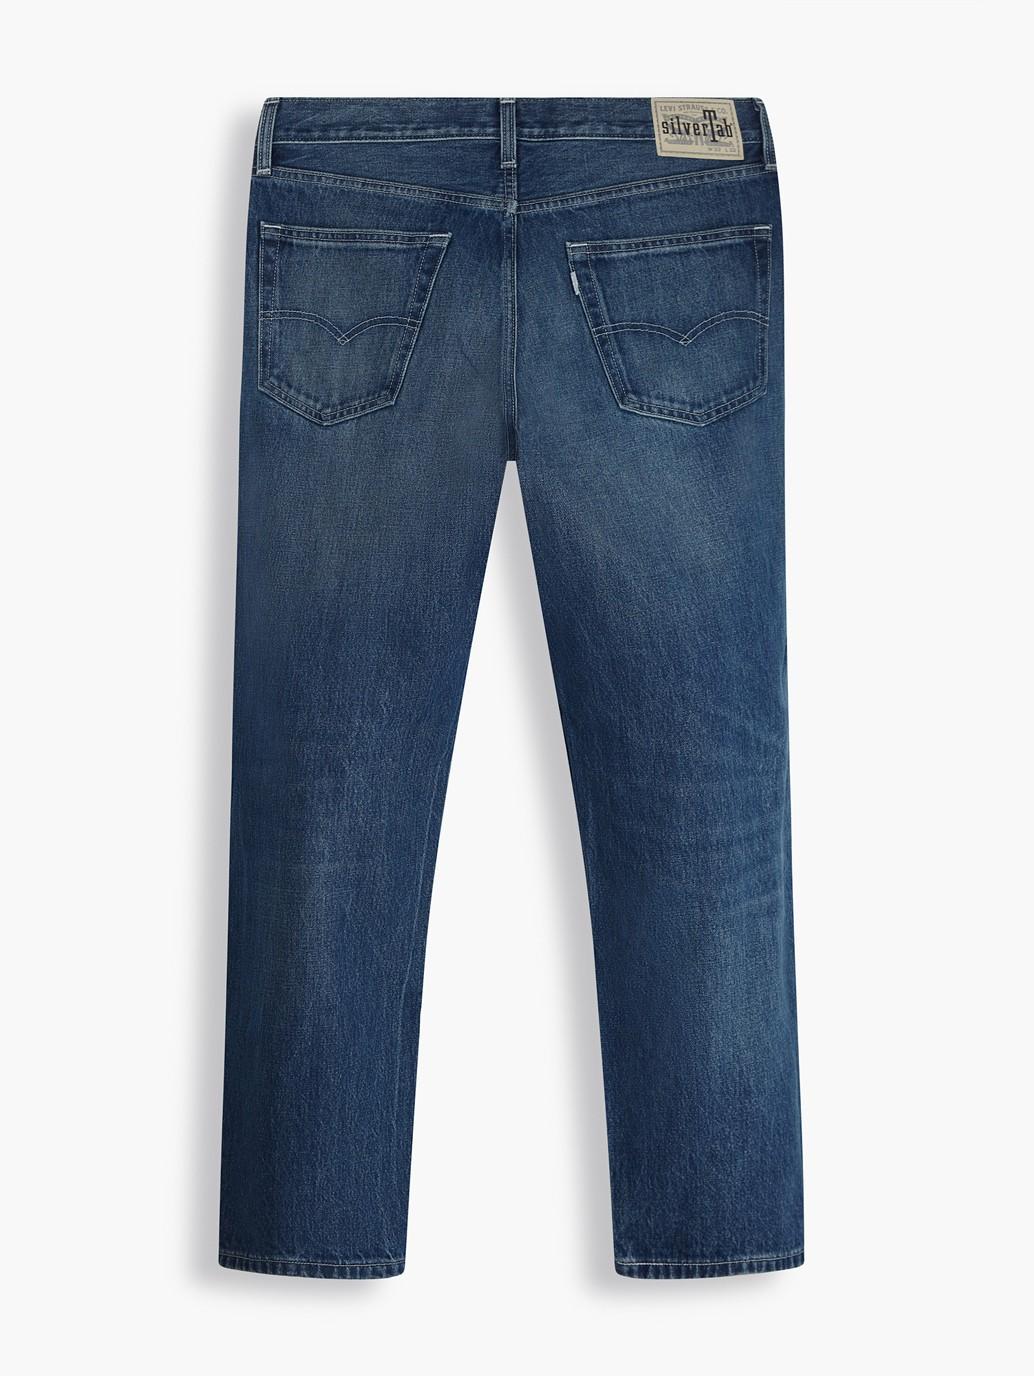 Buy Levi's® Men's SilverTab Loose | Levi’s® Official Online Store ID